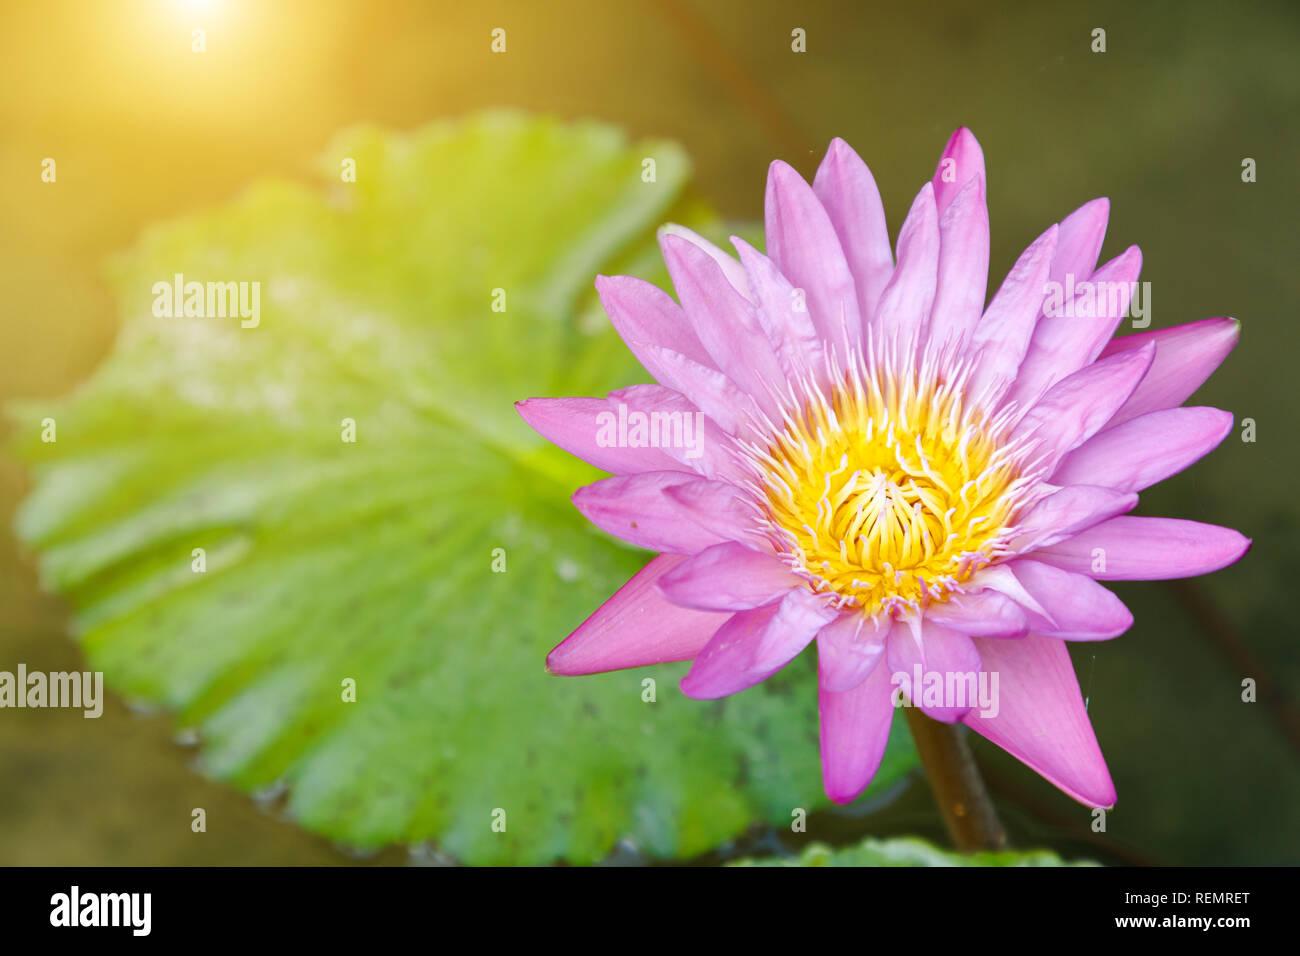 Lotus flower or water lily flower blooming with green leaves background in the pond at sunny summer or spring day. Nymphaea water lily. Stock Photo